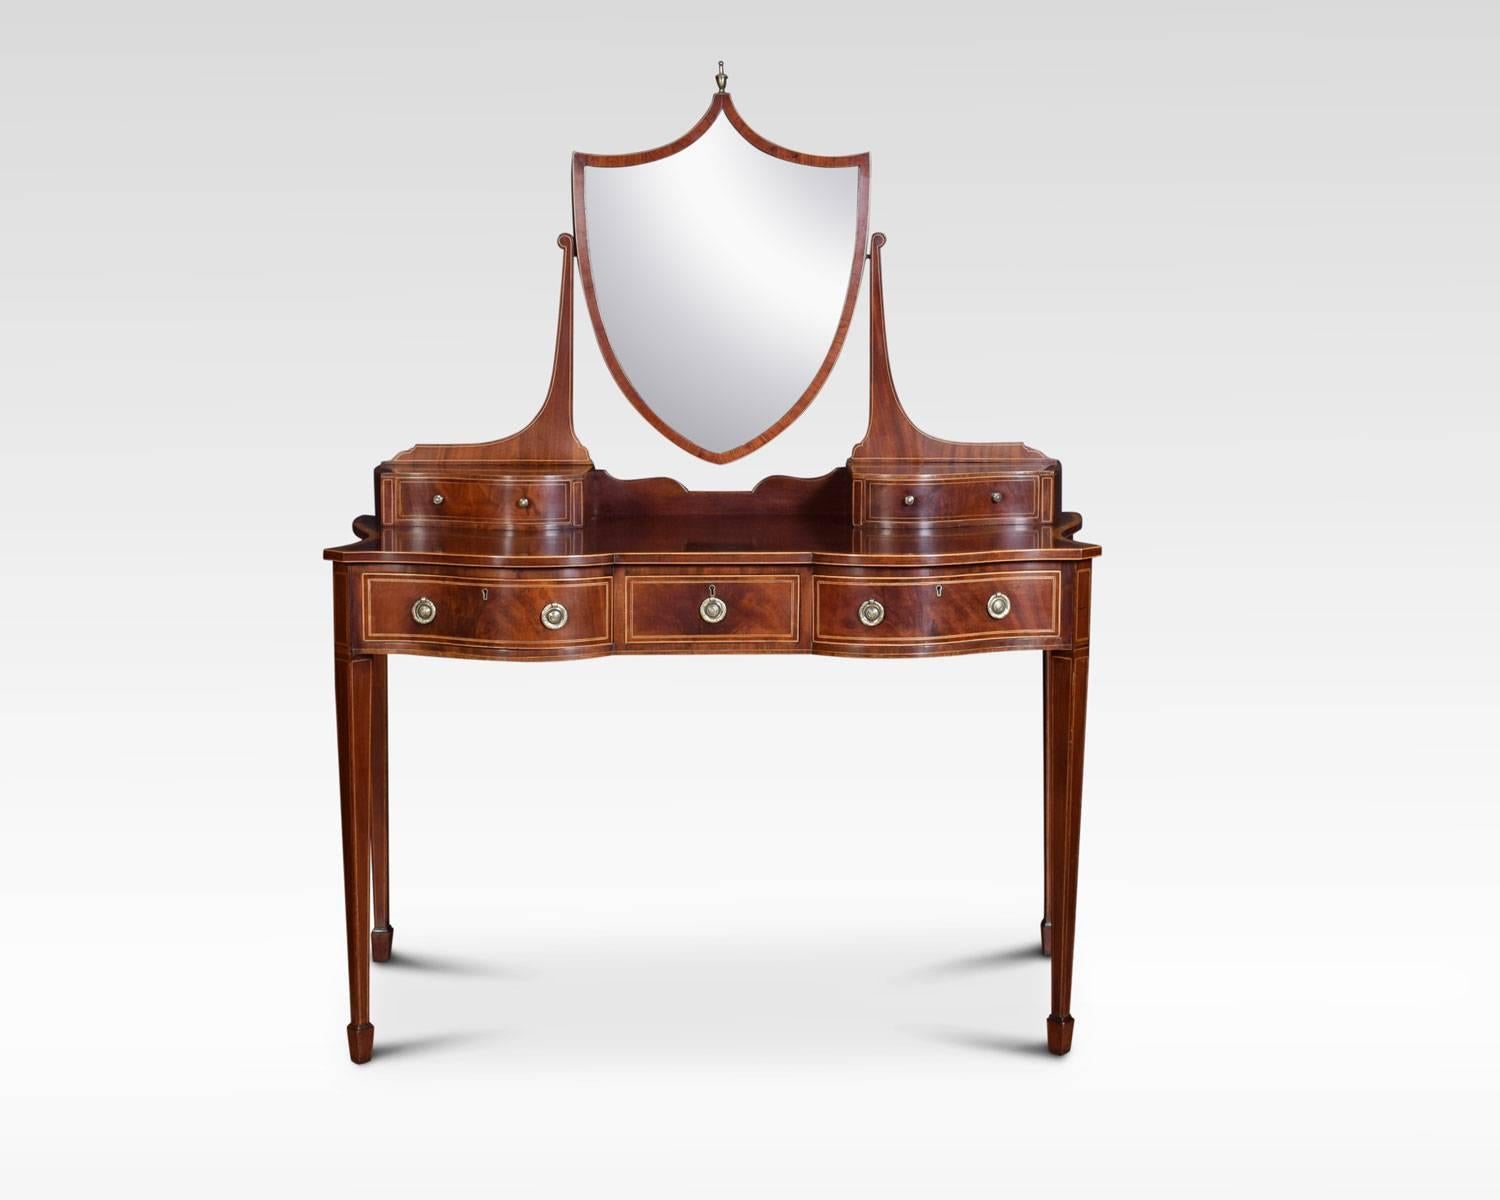 Edwardian Mahogany string inlaid dressing table, having a tilting shield shaped mirror with urn finial, raised on shaped supports, flanked by two short drawers. The kingwood crossbanded shaped dressing tabletop above three freeze draws fitted with